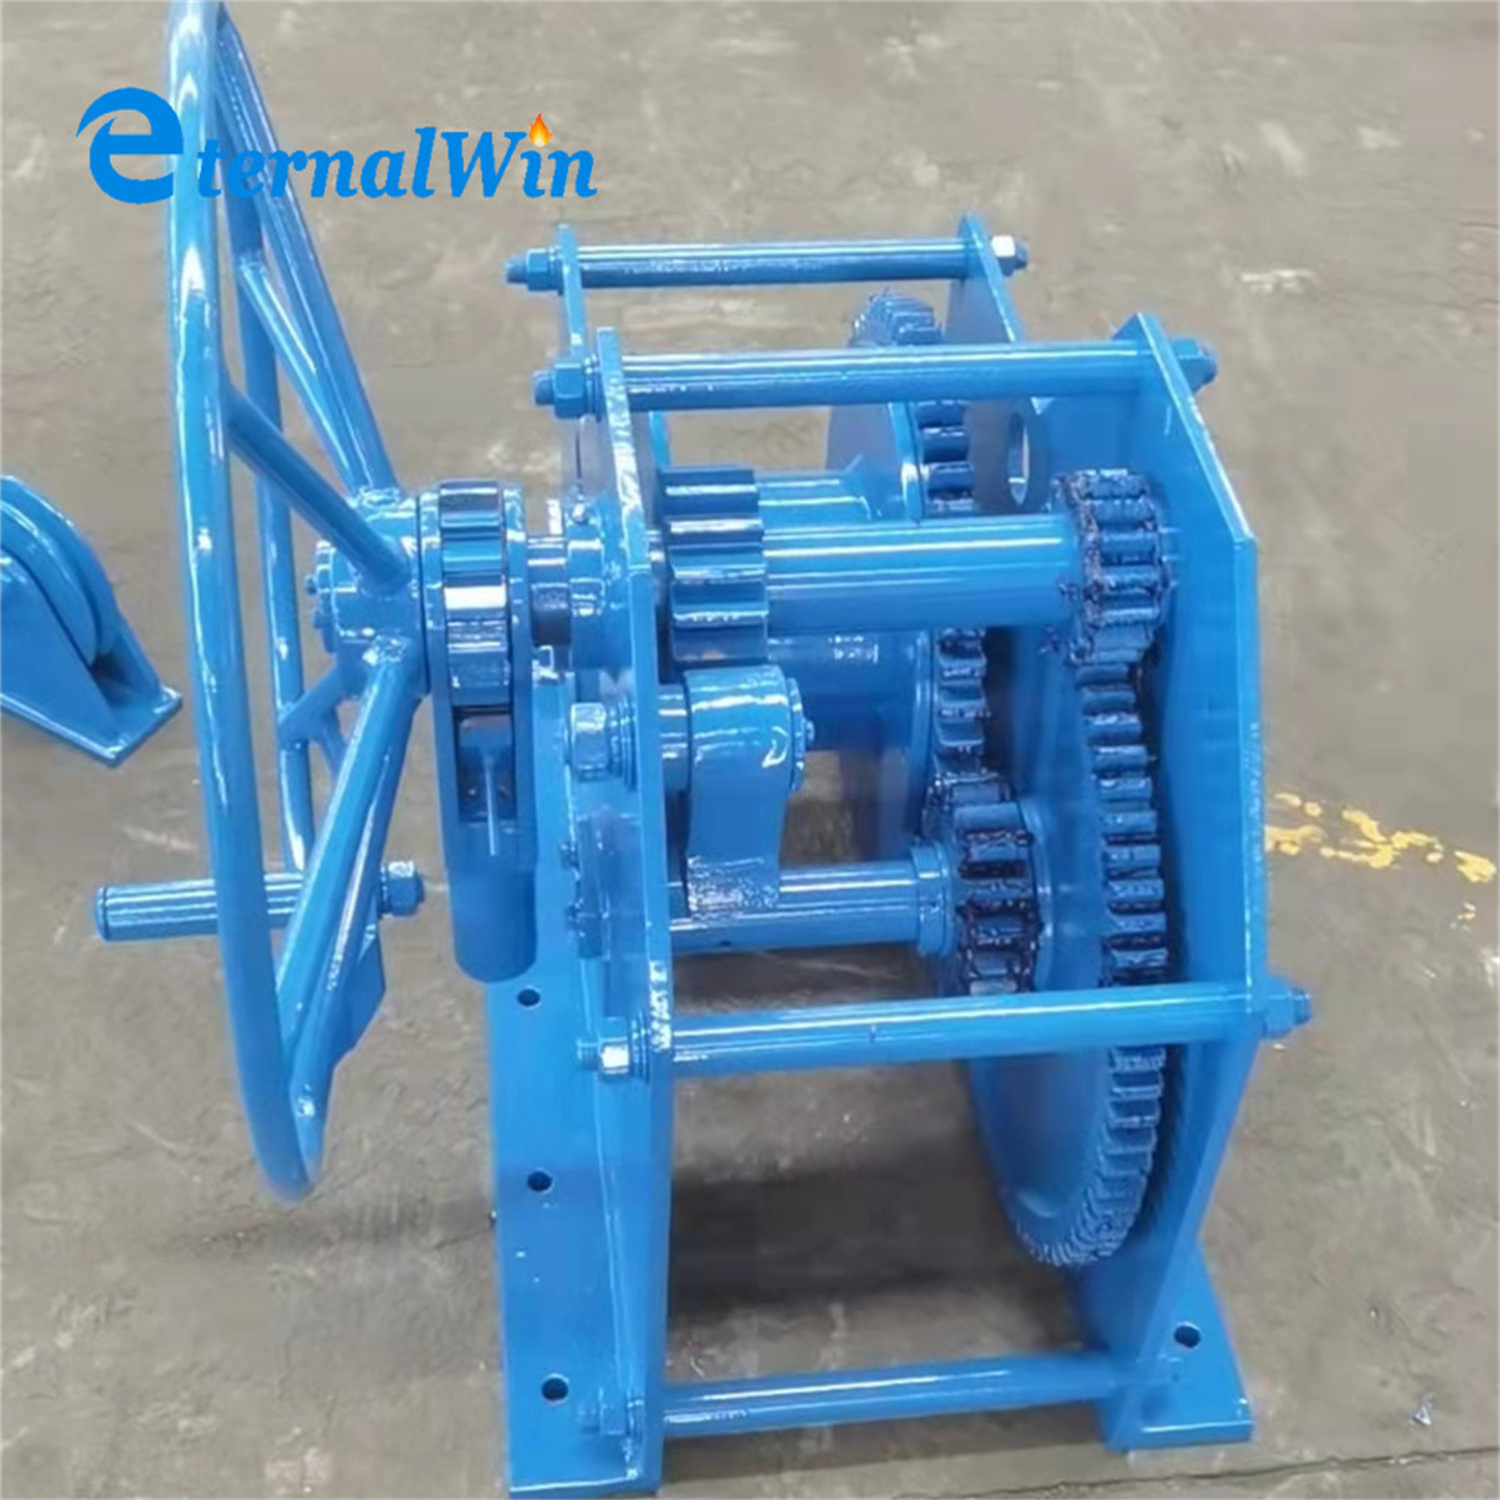 
                5 Ton Manual Hand Winch Electric/ Diesel Engine Powered Towing Tools Boat Winch with Wire Rope Hand Brake Winch
            